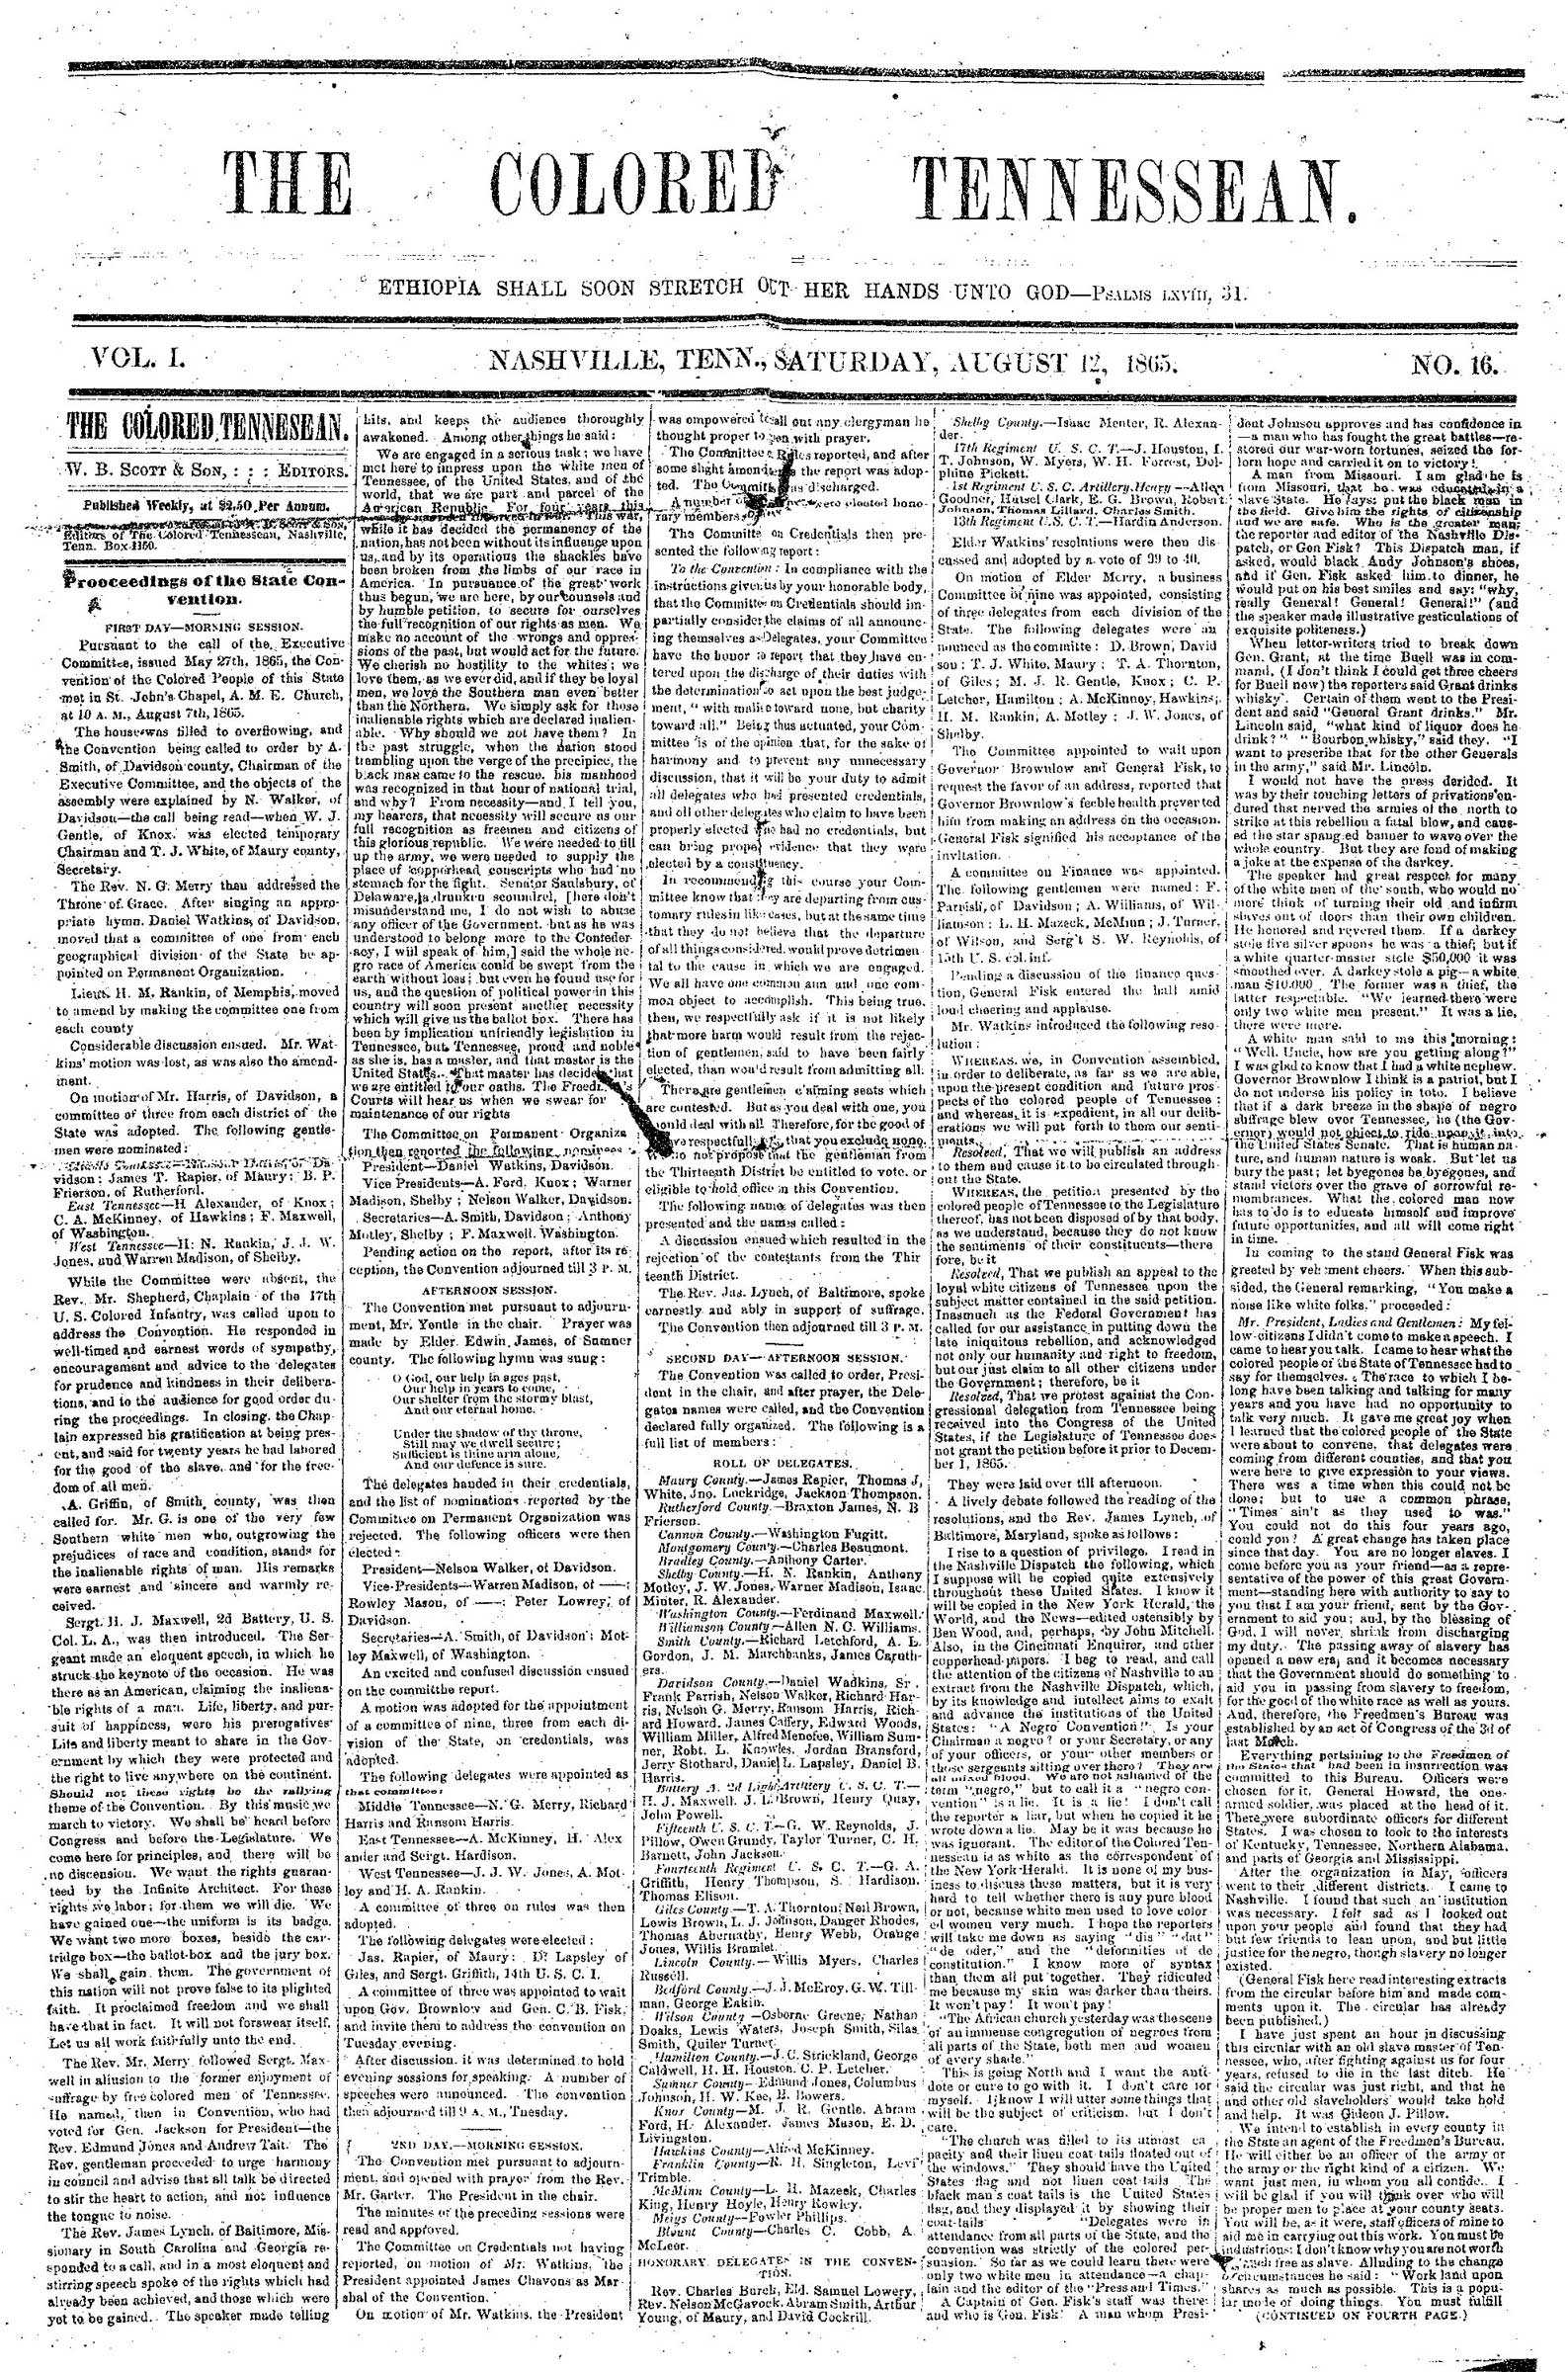 A full page of newspaper with 5 columns of tiny typed face. It is dated August 12th, 1865